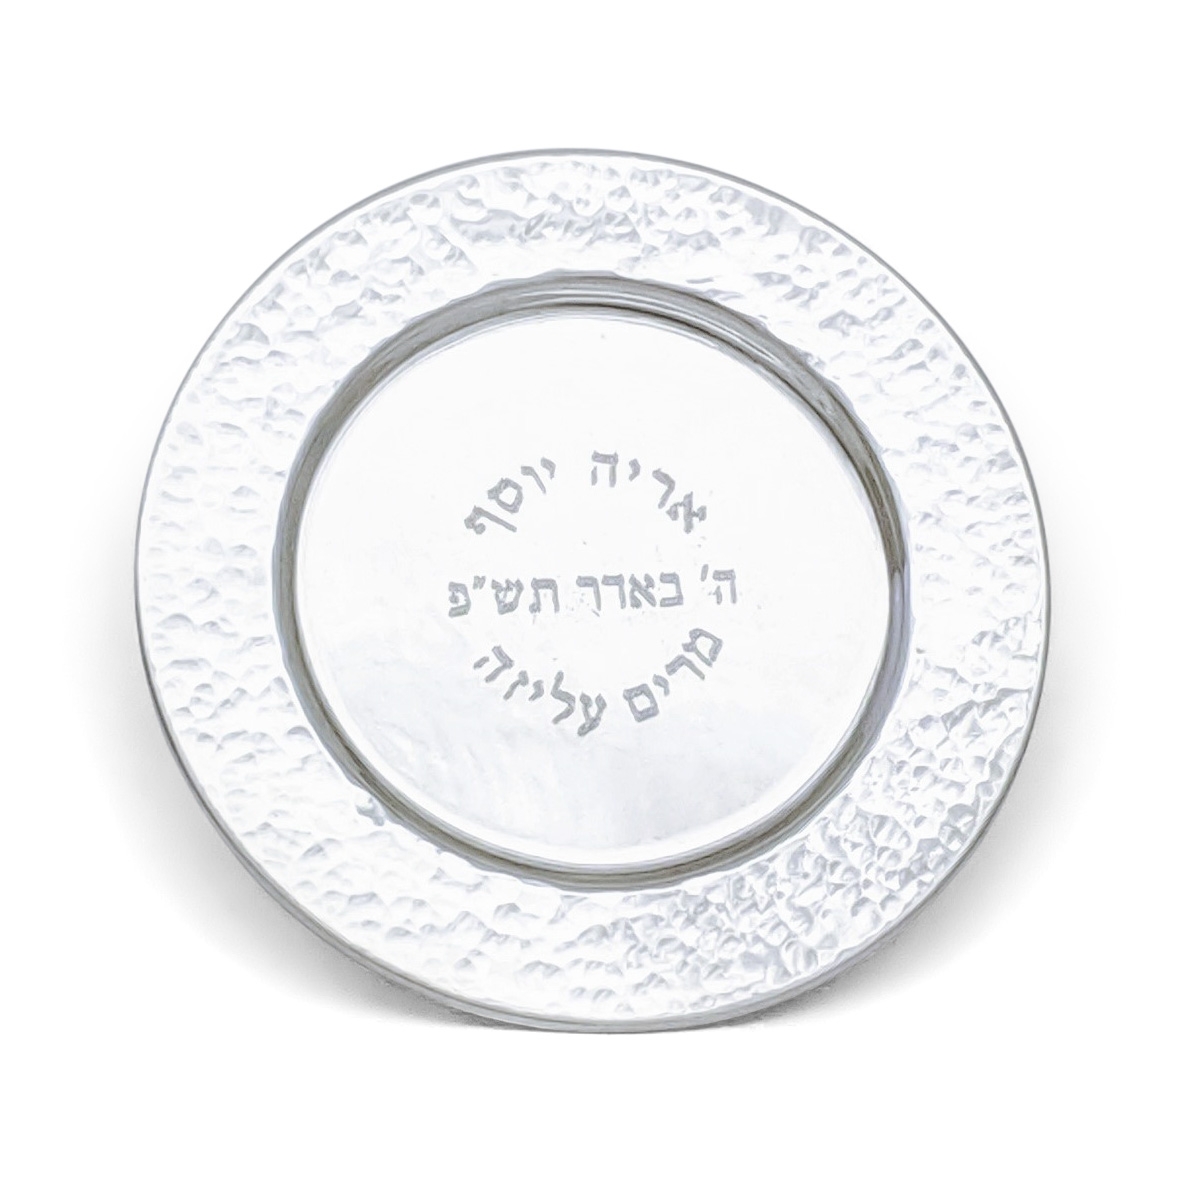 Bier Judaica Handcrafted Sterling Silver Plate For Kiddush Cup With Hammered Design - 1